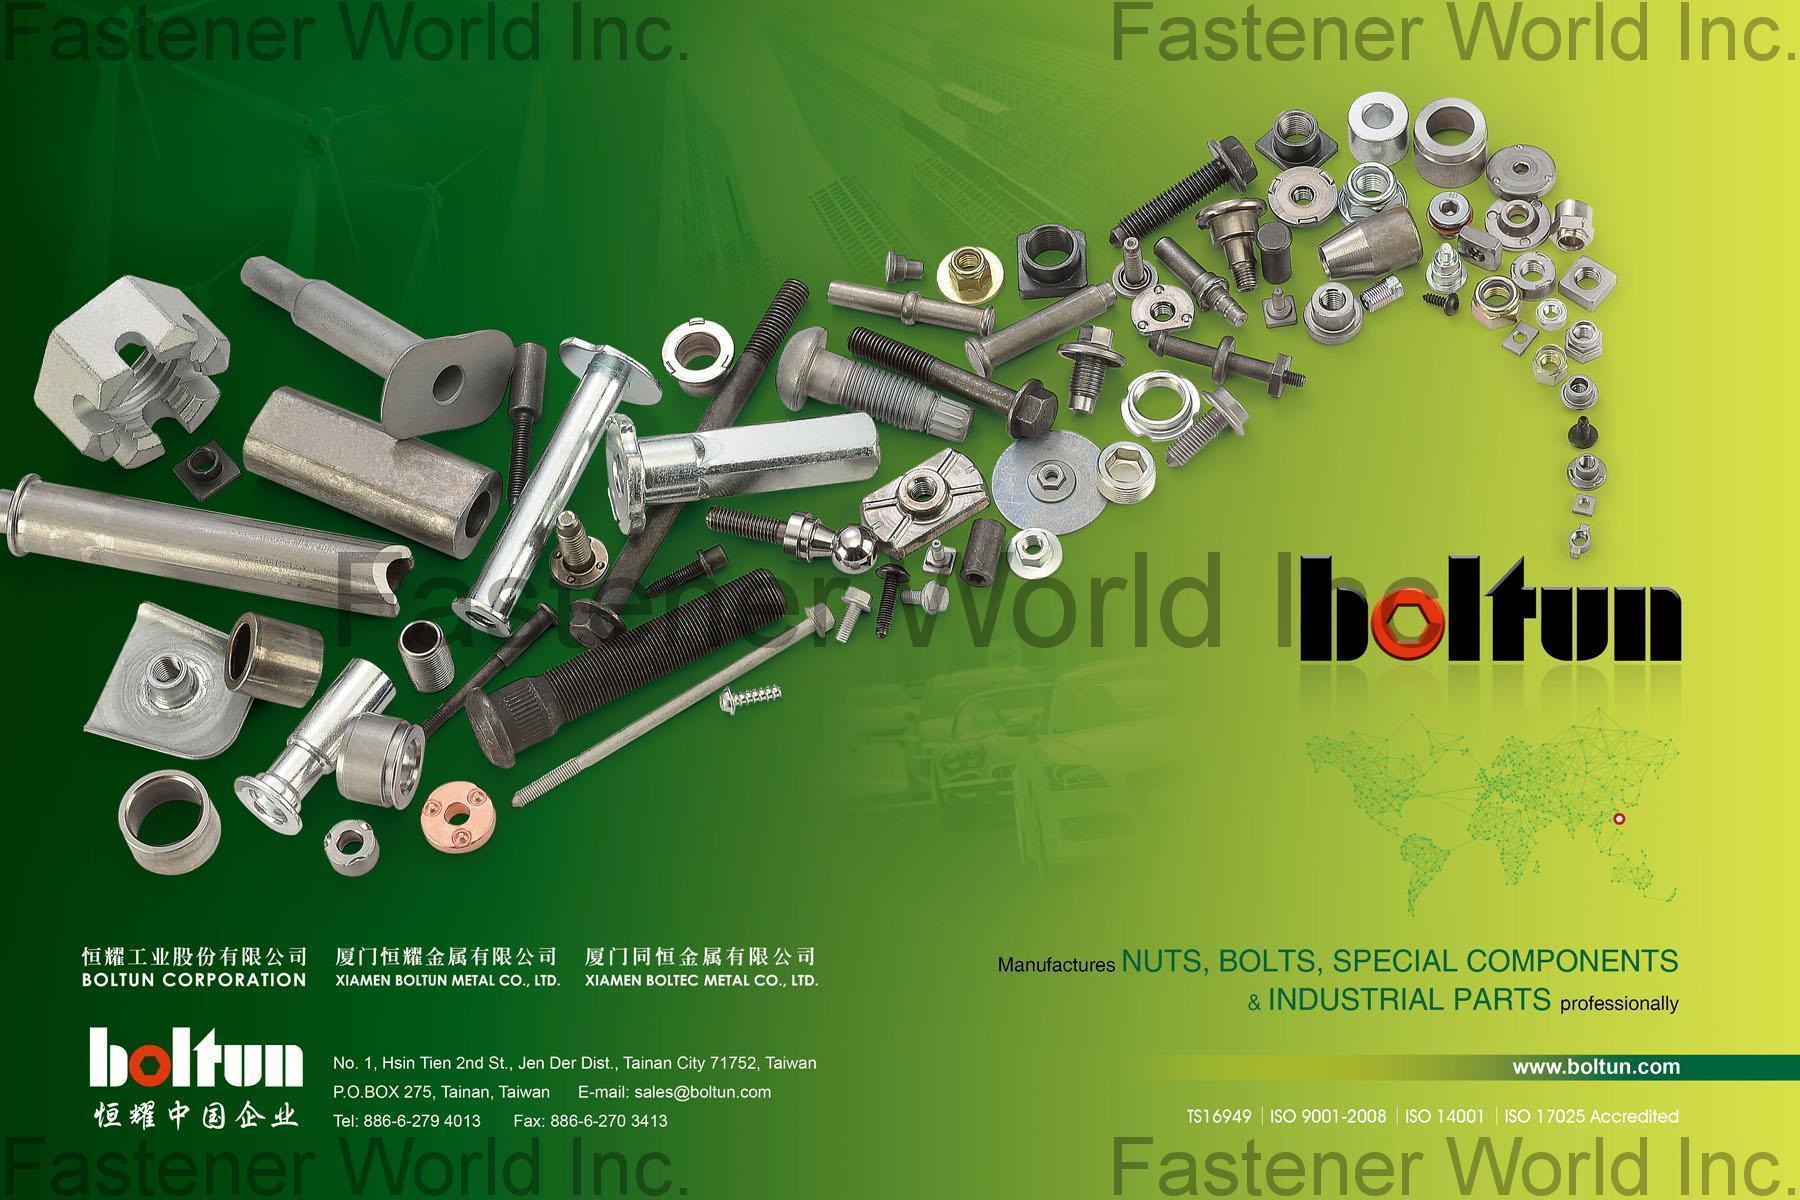 BOLTUN CORPORATION  , Welding Nuts,Rivet Nuts,Clinch Nuts,Locking Nuts,Nylon Insert Nuts,Conical Washer Nuts,T-Nuts,CNC Machining Parts,Stamping Parts,Bushed & Sleeves,Assembly Components,Special Parts,HEX. Bolt & Screw,Flange Bolt,Socket,Sems,Screw With Welding Projection,Screw With Welding Ring & Points,Clinch Bolt,T C Bolt,Special Pin,Wheel Bolt,Rail Bolt,Rail Bolts Construction Fasteners: Nuts, Screws & Washers,Wind Turbine Fasteners Kits: Nuts, Bolts & Washers Truck Wheel Bolts,Bolts & Nuts & Components,Motorcycle parts,Nylon rings & special washer,Expansion Bolt , Special Parts